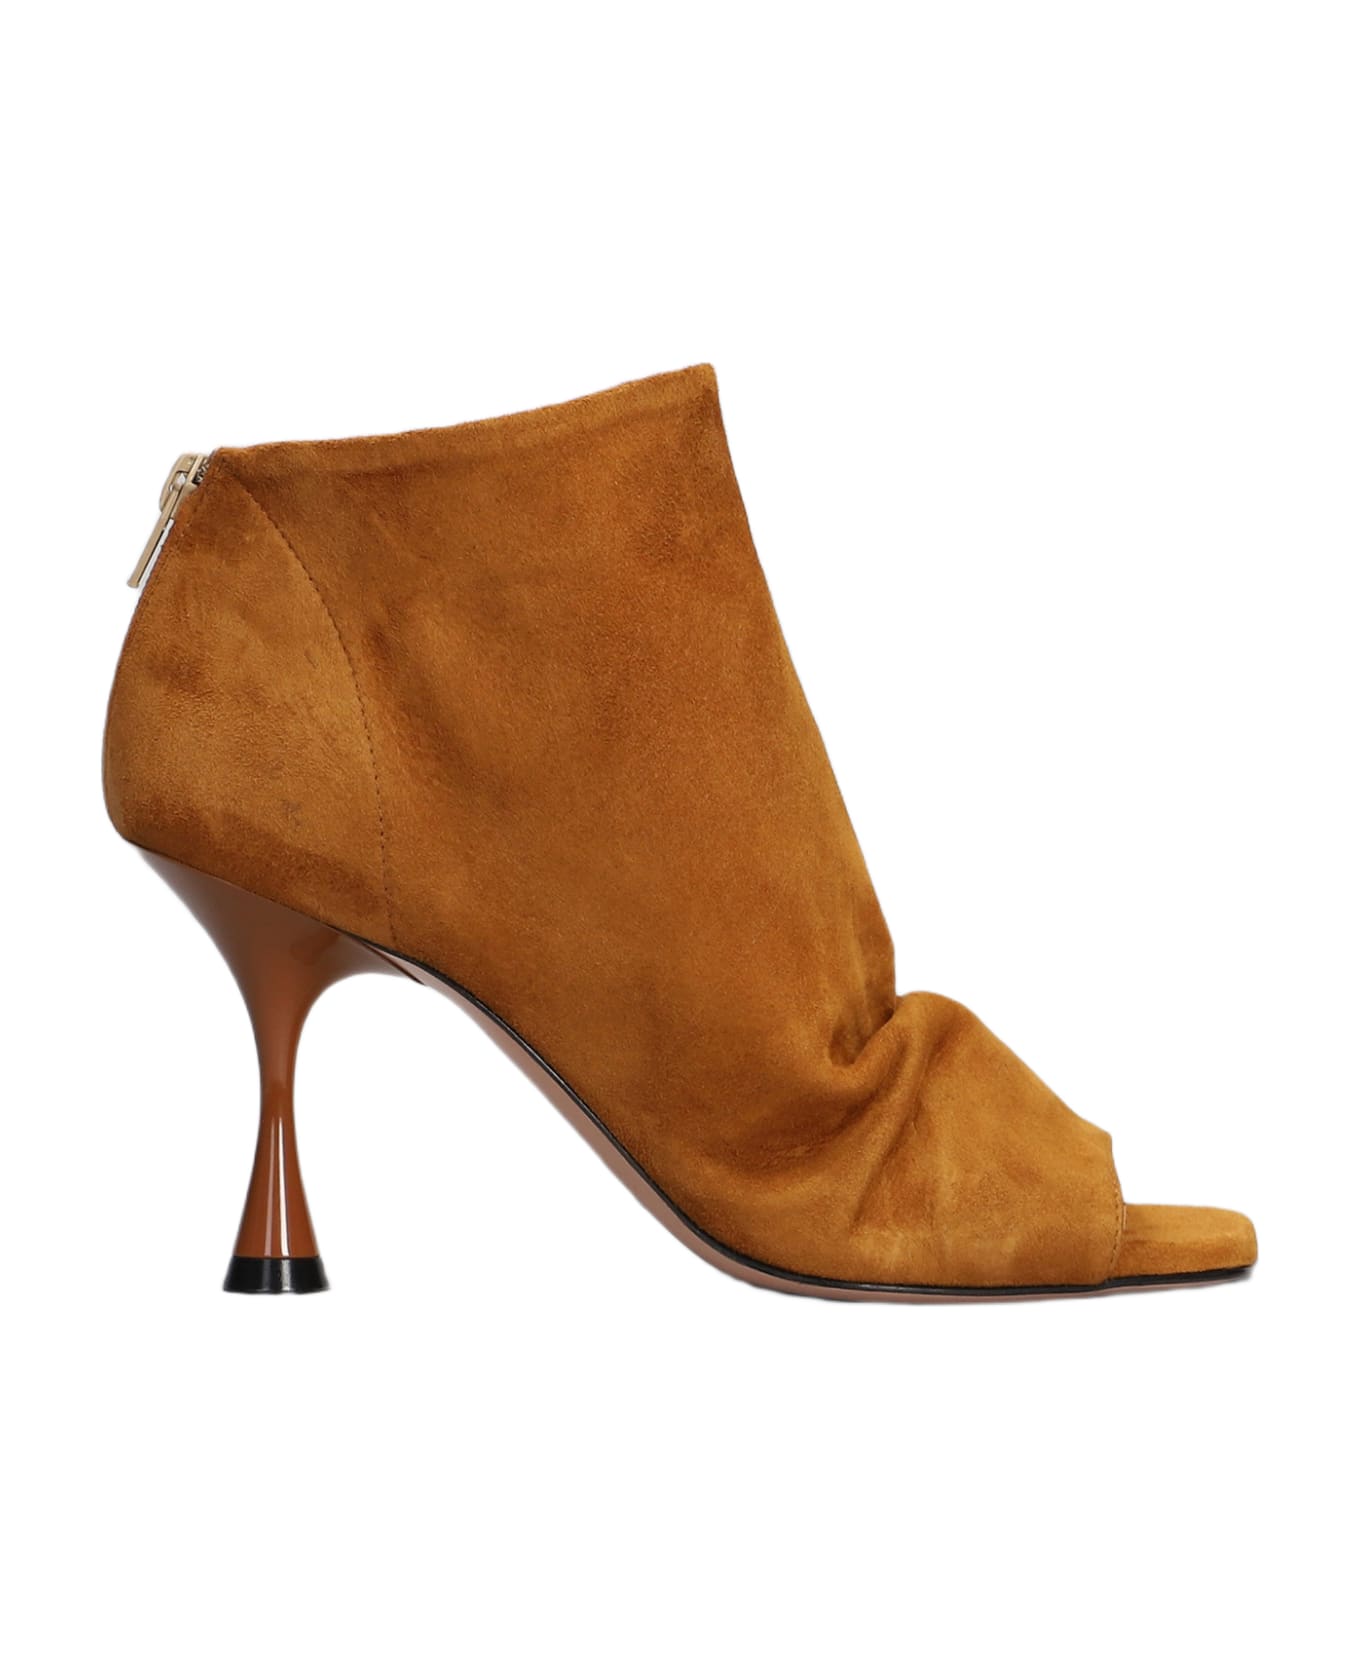 Marc Ellis High Heels Ankle Boots In Leather Color Suede - leather color